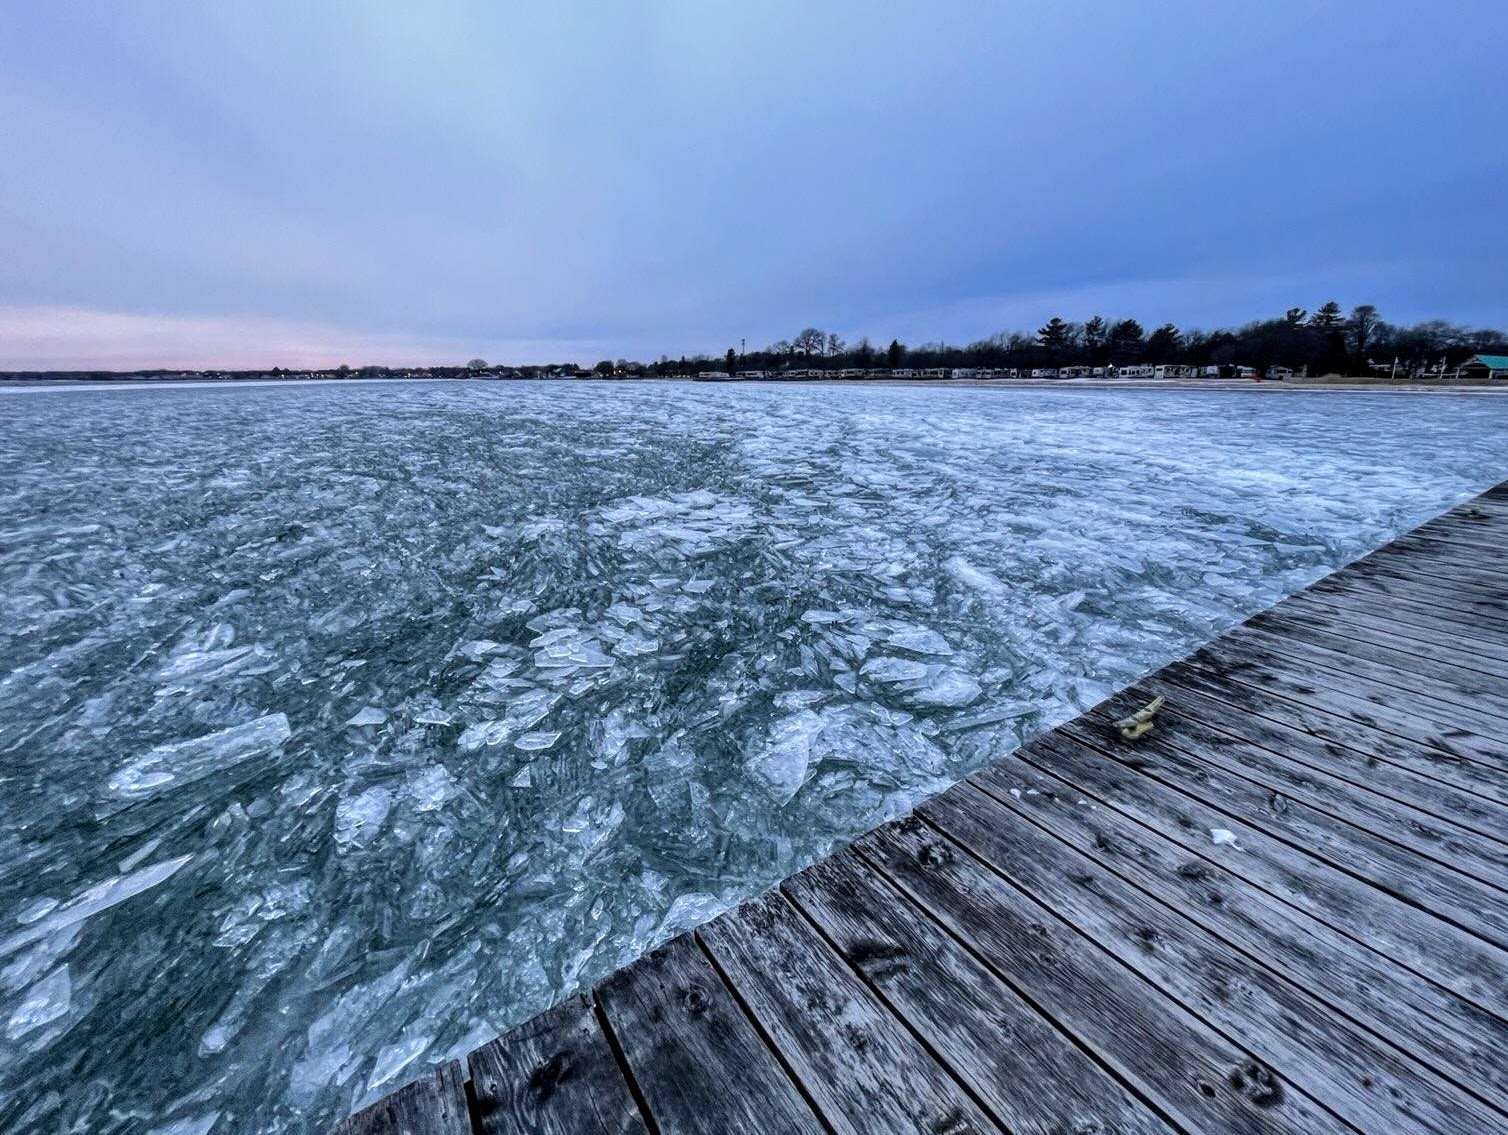 A wooden dock is surrounded by sharp shards of ice on a lake